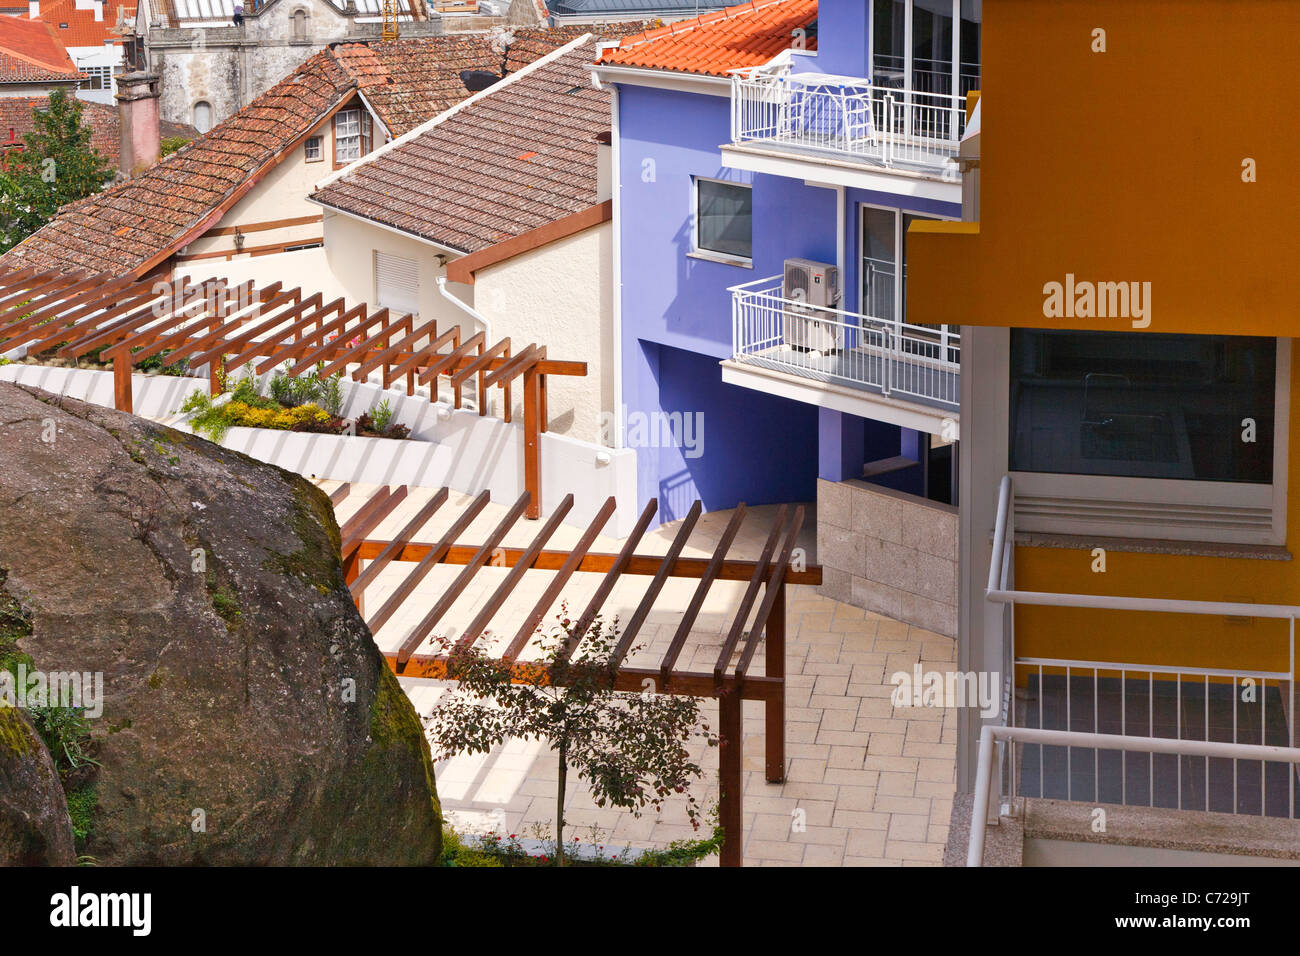 Styles of old and new buildings in Viseu Stock Photo